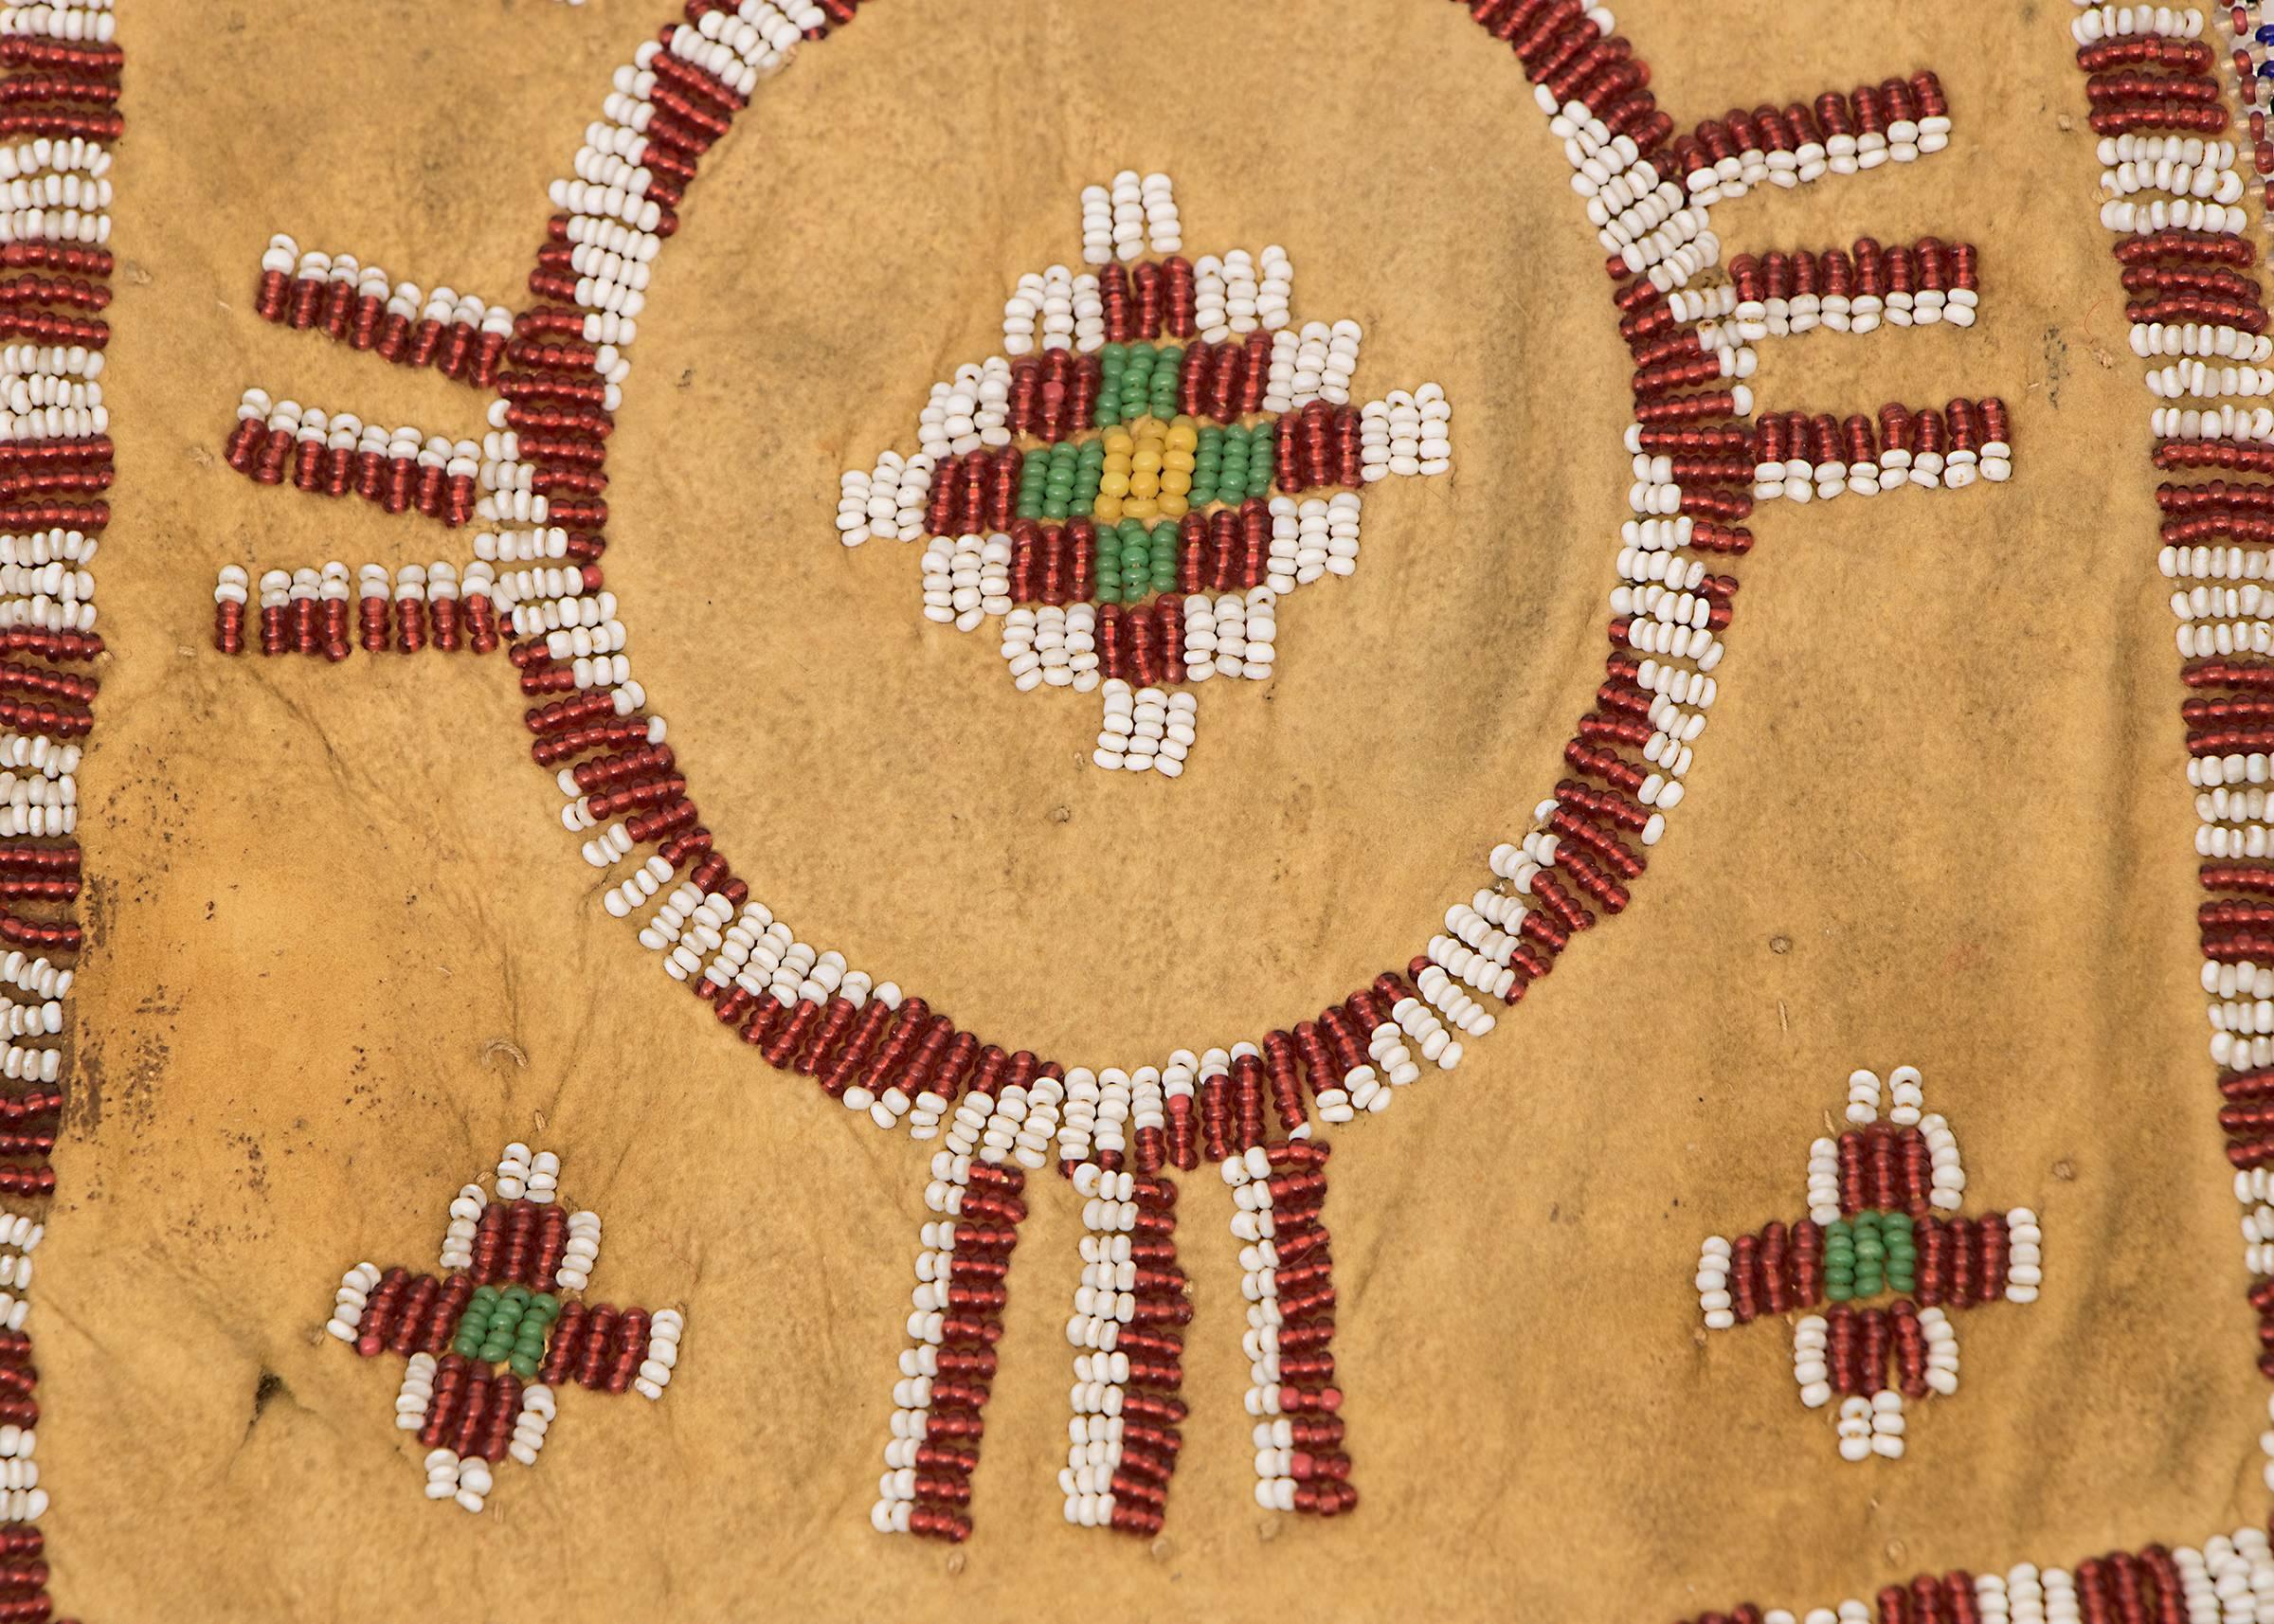 Constructed of native-tanned hide and partially beaded with cross and geometric devices. Beadwork fringe at the bottom.
The Apache, a nomadic American Plains Indian tribe, followed the buffalo and ranged across the American Southwest including areas